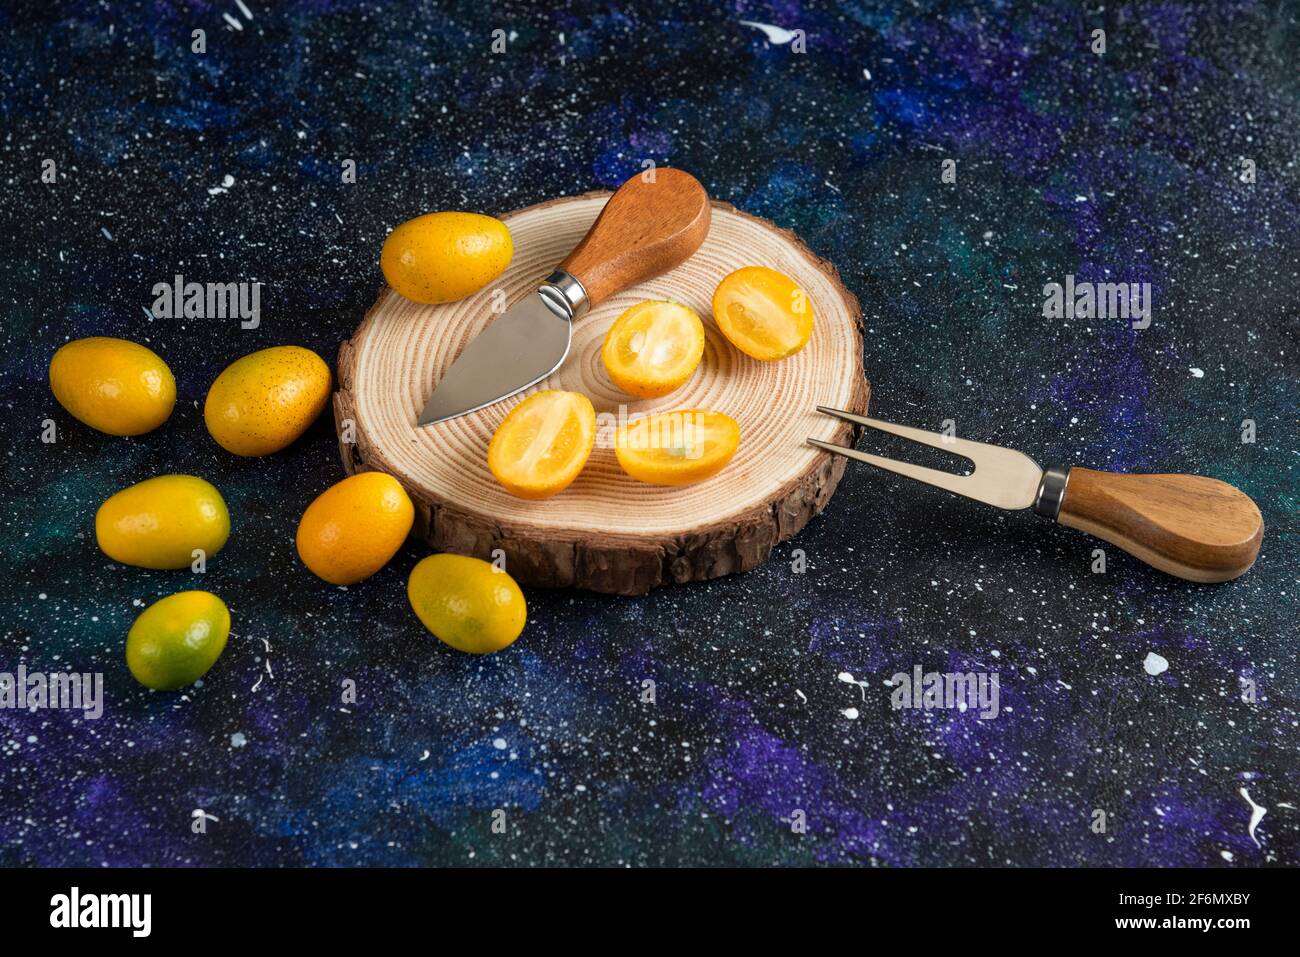 Pile of kumquats whole or half cut over wooden board Stock Photo